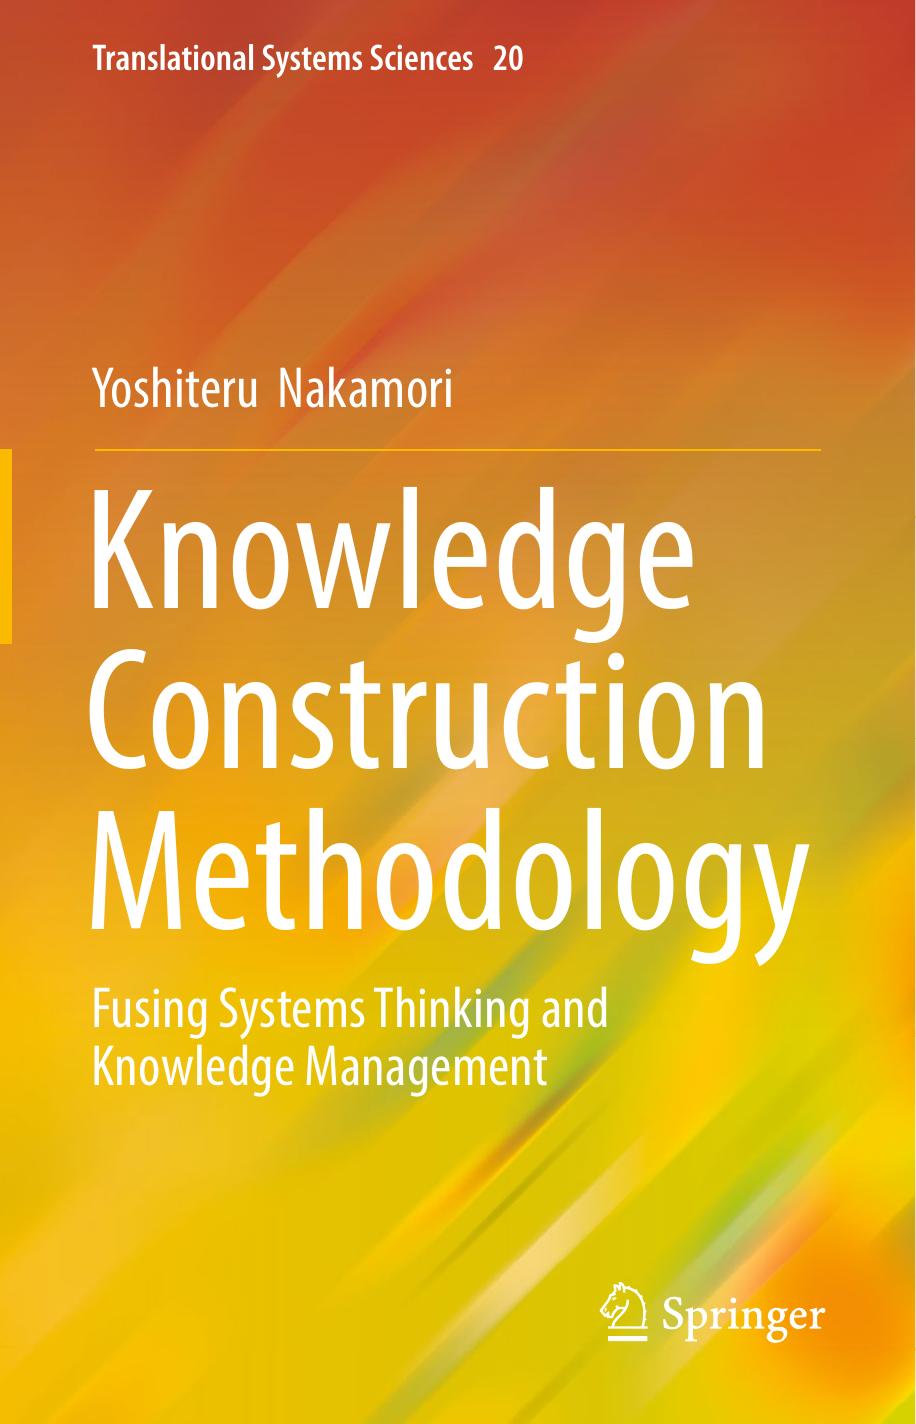 Knowledge Construction Methodology: Fusing Systems Thinking and Knowledge Management